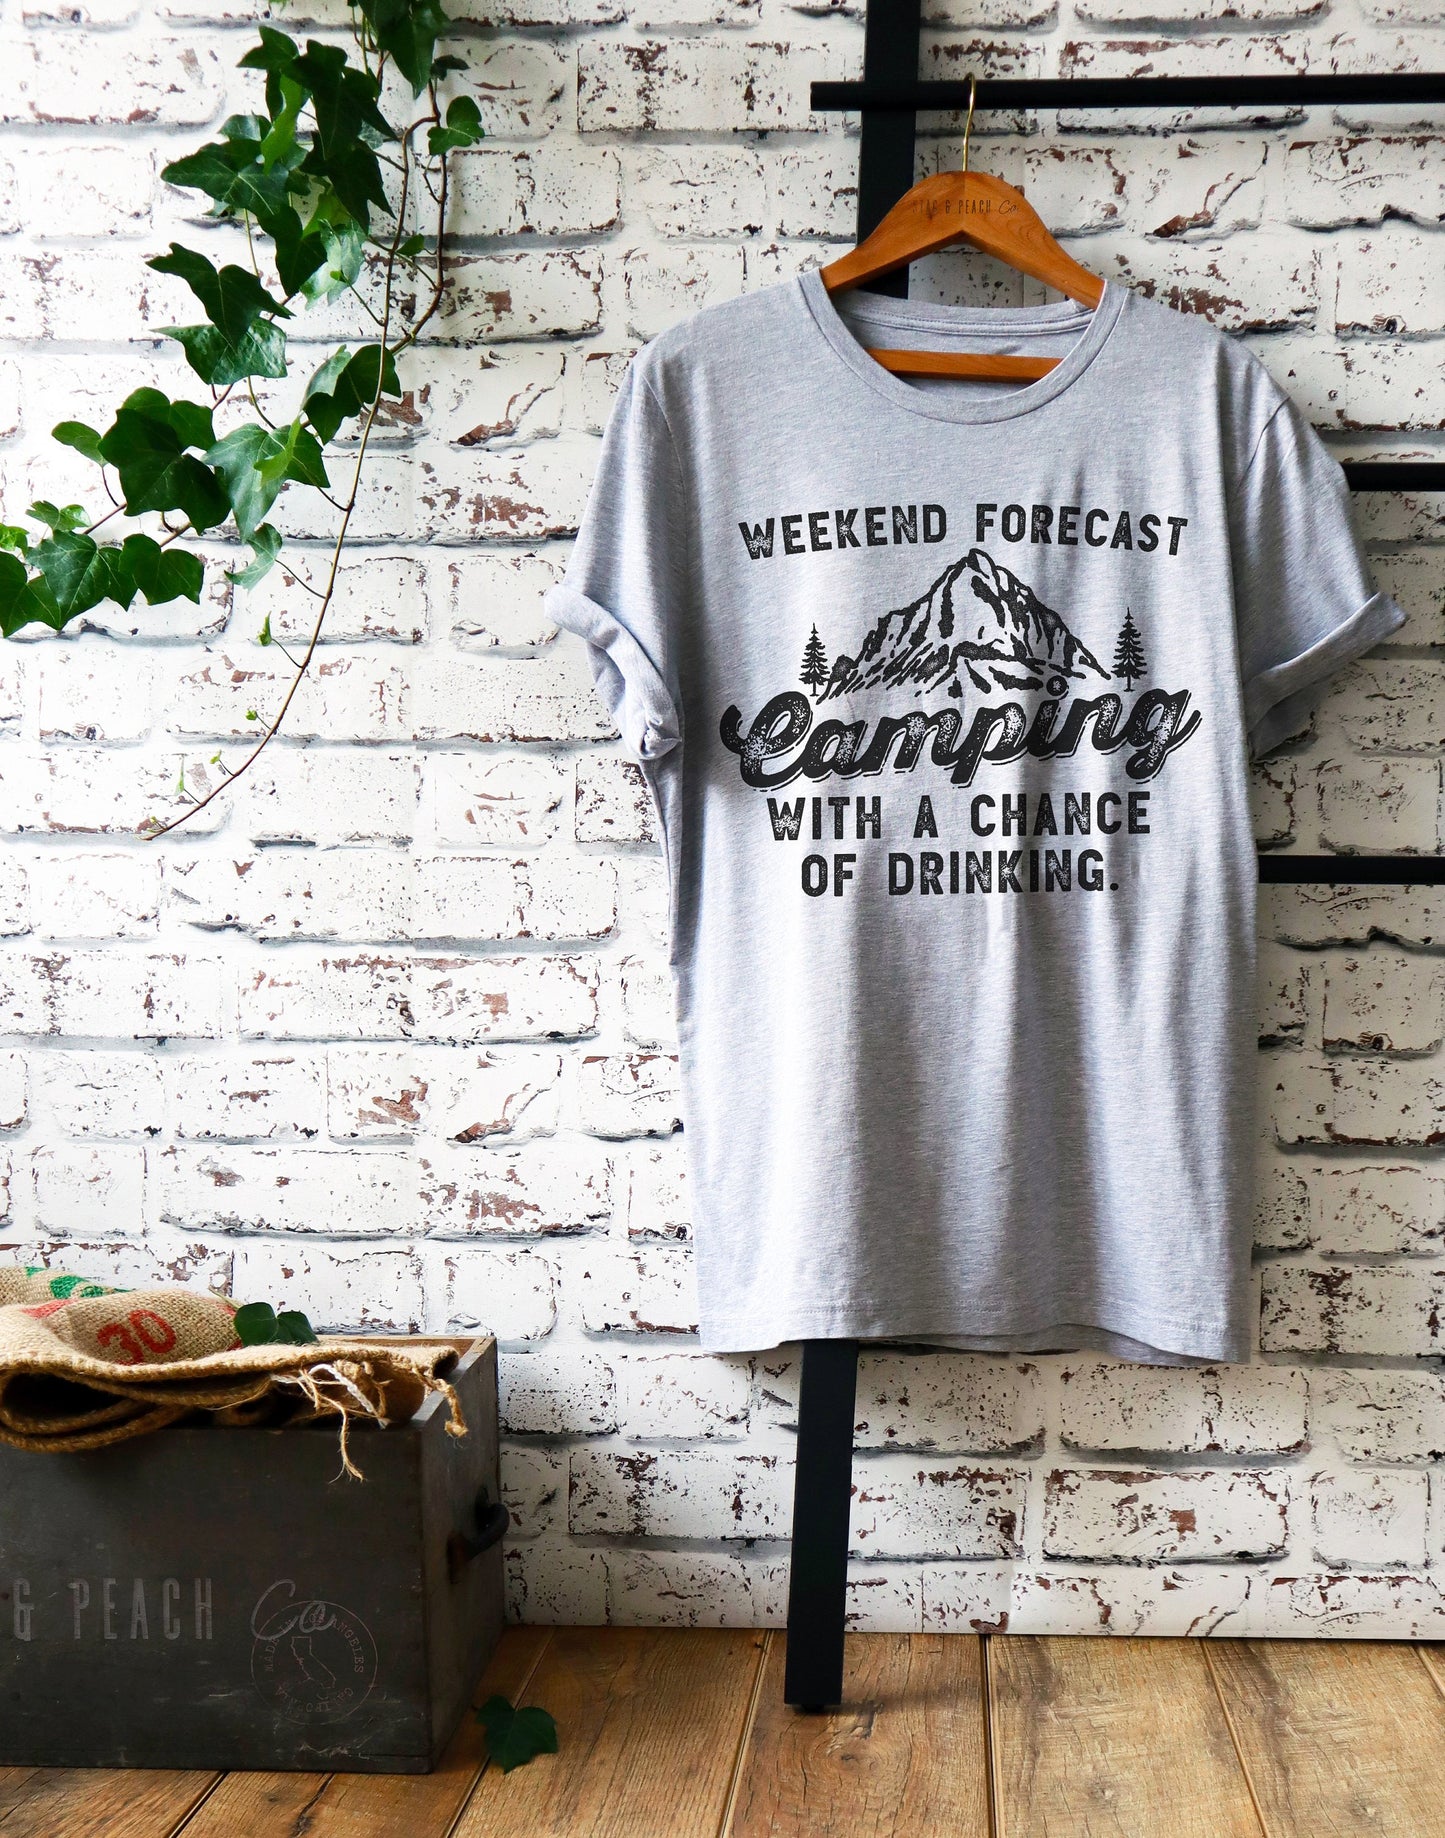 Weekend Forecast Camping With A Chance Of Drinking Unisex Shirt, Camping Shirt, Happy Camper Shirt, Mountain Shirt, Camping Gift, Road Trip